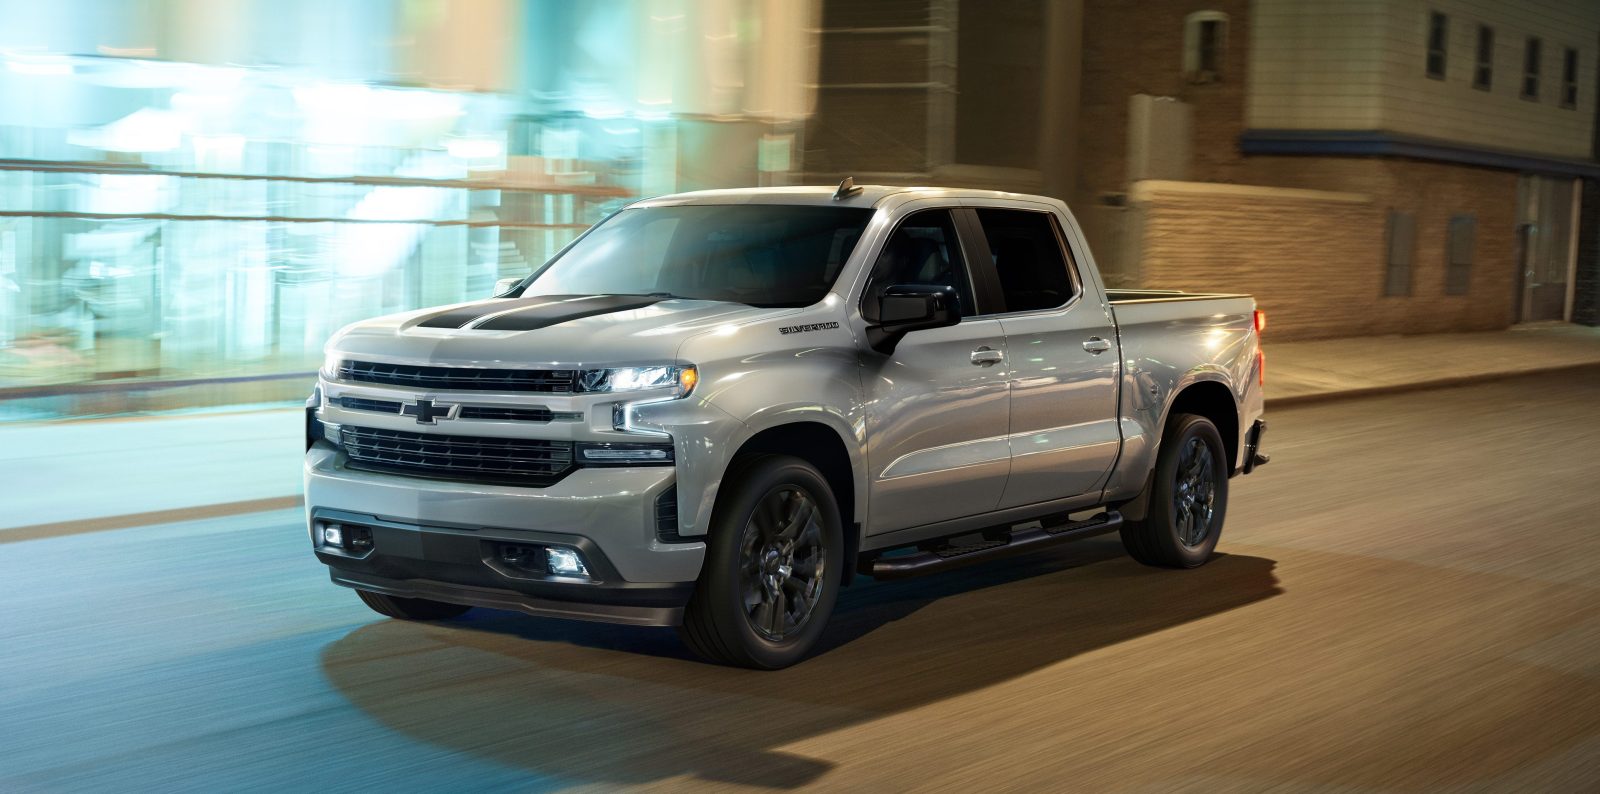 GM to build Chevrolet Silverado Electric Pickup with 400mile range at